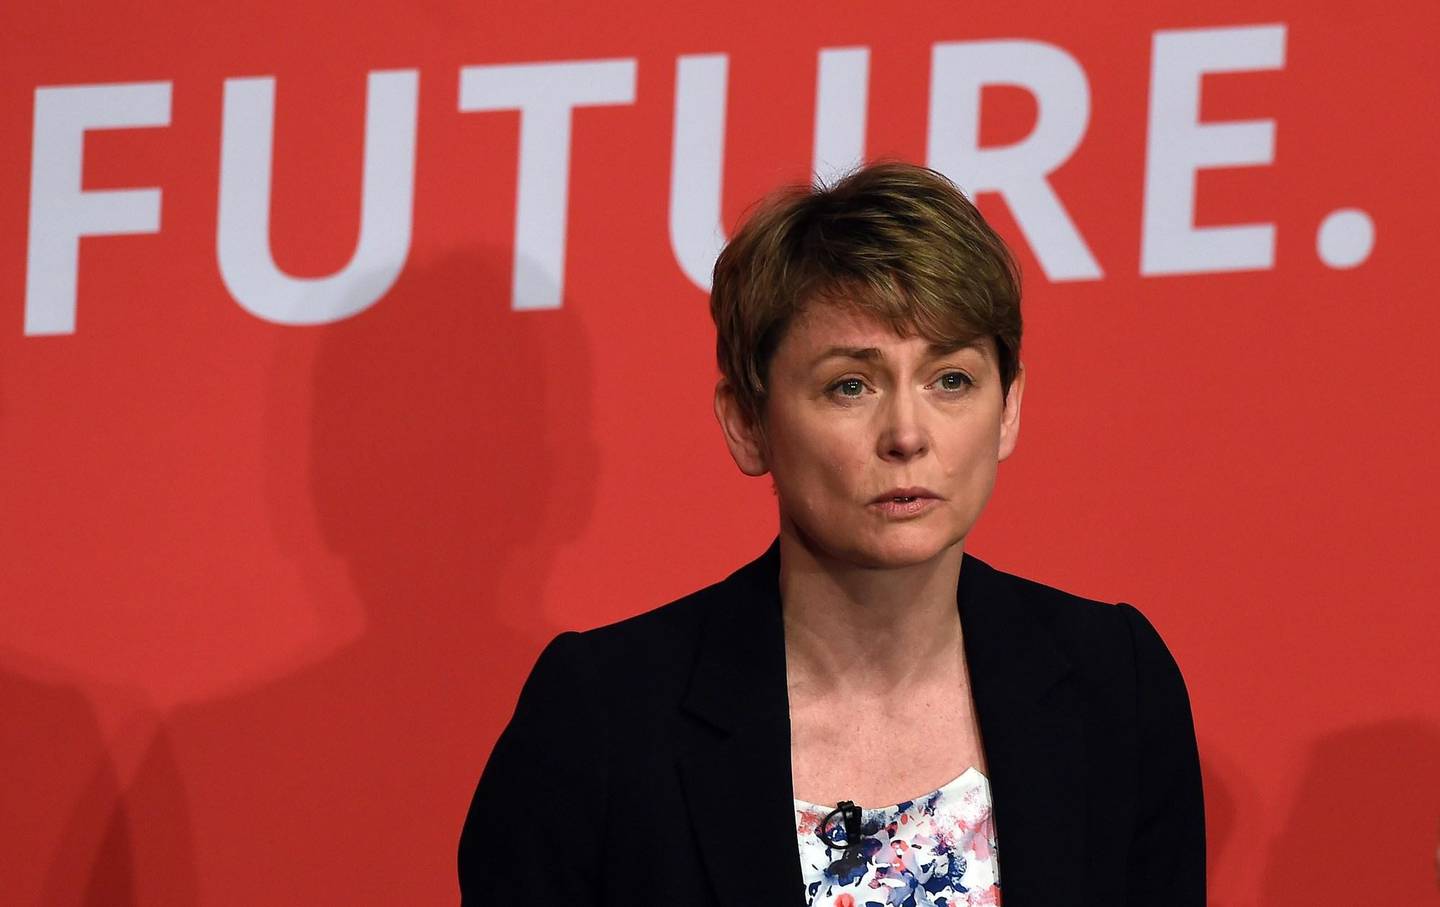 Yvette Cooper takes part in a Labour Party leadership hustings event in Warrington, north west England on July 25, 2015, hosted by journalist Paul Waugh. With Britain's political class starting its summer recess this week, commentators say Labour must consider whether it wants to be simply a principled opposition or a party with a real shot at power at the next general election in 2020. AFP PHOTO / PAUL ELLIS